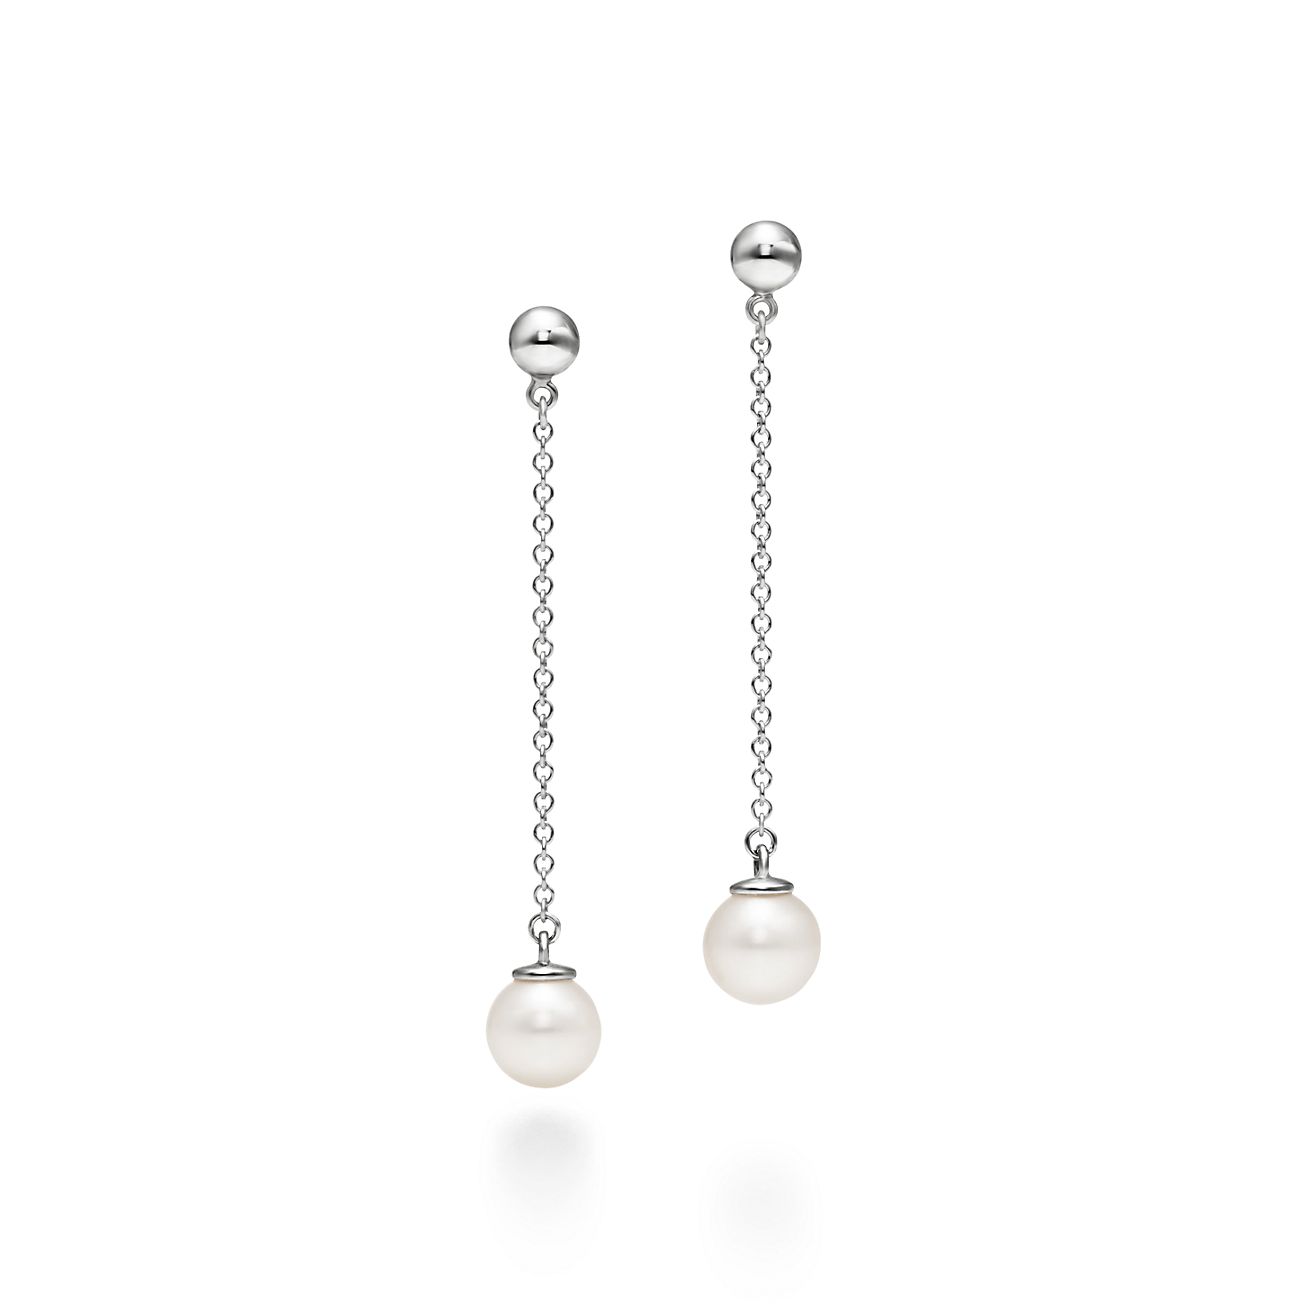 Ziegfeld Collection drop earrings in sterling silver with pearls. | Tiffany & Co.